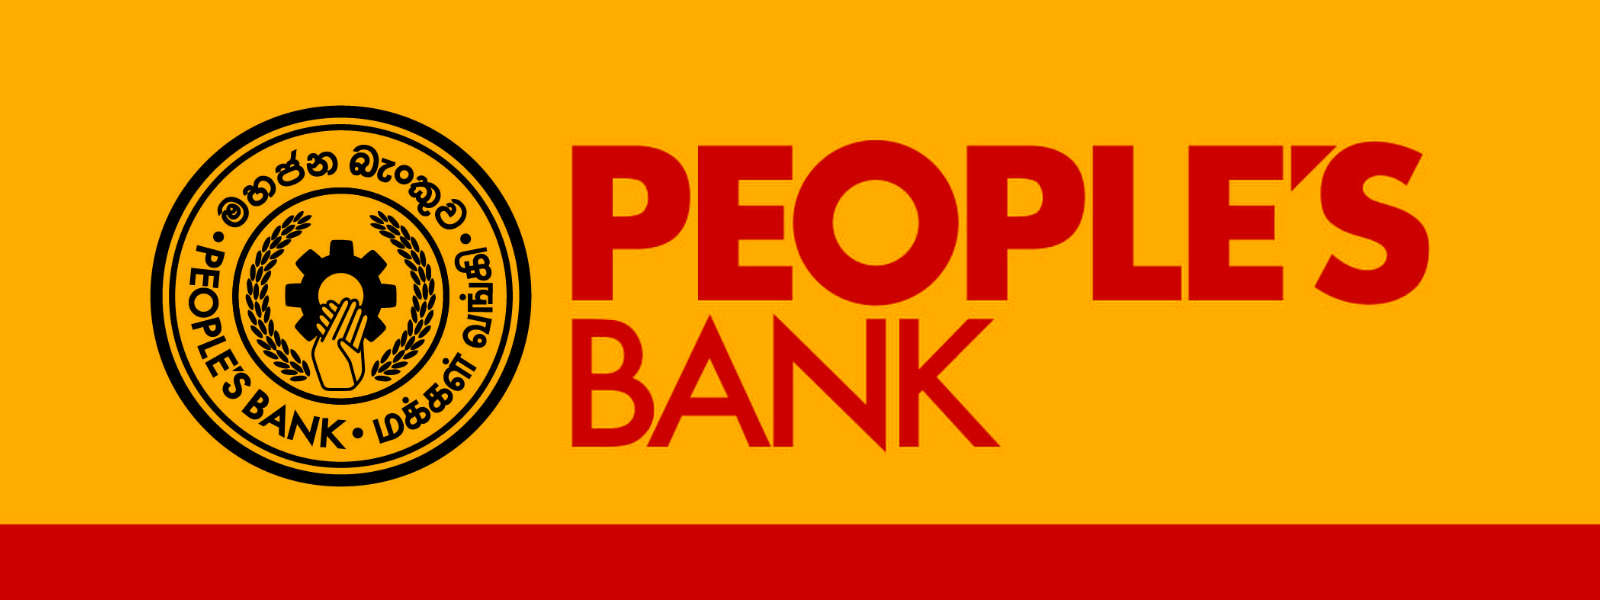 Loss of Rs. 2 billion to the Peoples Bank